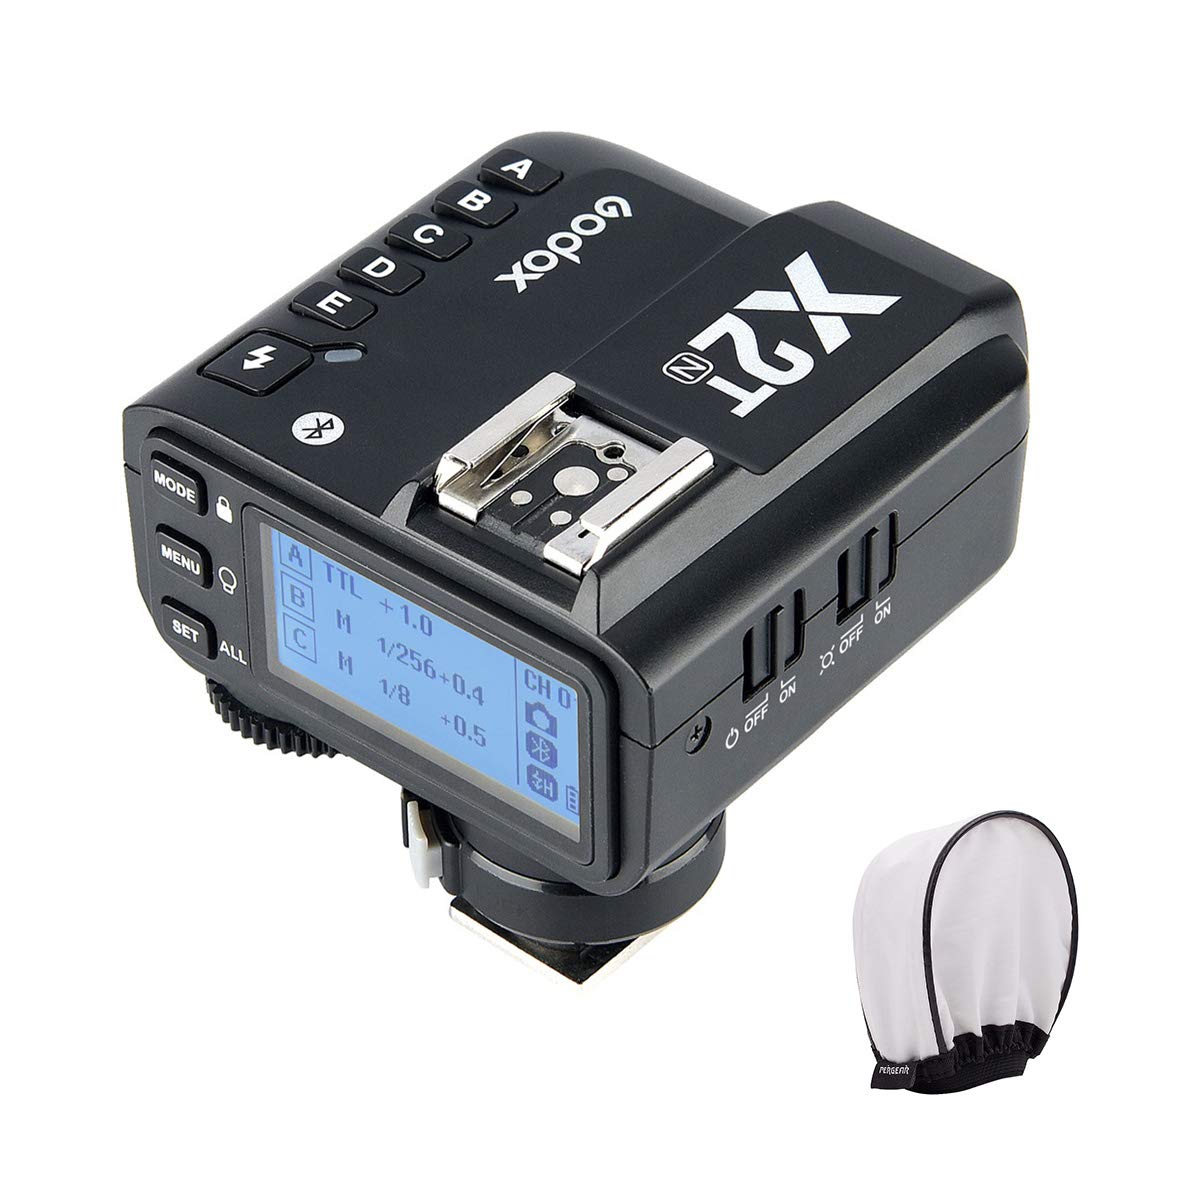 Godox X2T-N TTL Wireless Flash Trigger for Nikon, Bluetooth Connection, 1/8000s HSS,5 Separate Group Buttons, Relocated Control-Wheel, New Hotshoe Locking, New AF Assist Light